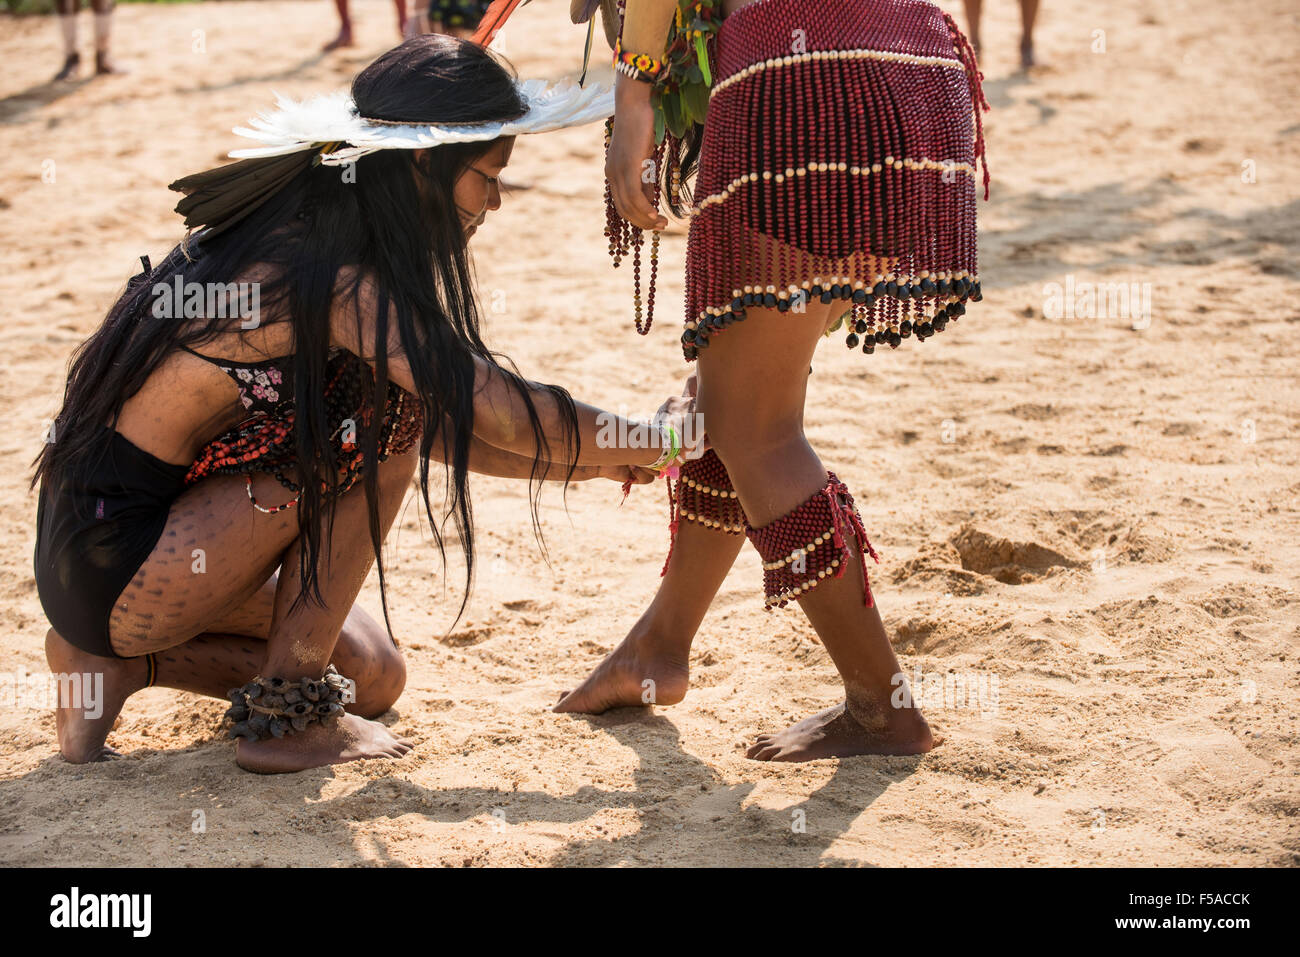 Palmas, Tocantins State, Brazil. 29th October, 2015. An indigenous Brazilan girl ties a beaded anklet round the leg of a fellow competitor at the International Indigenous Games, in the city of Palmas, Tocantins State, Brazil. Credit:  Sue Cunningham Photographic/Alamy Live News Stock Photo